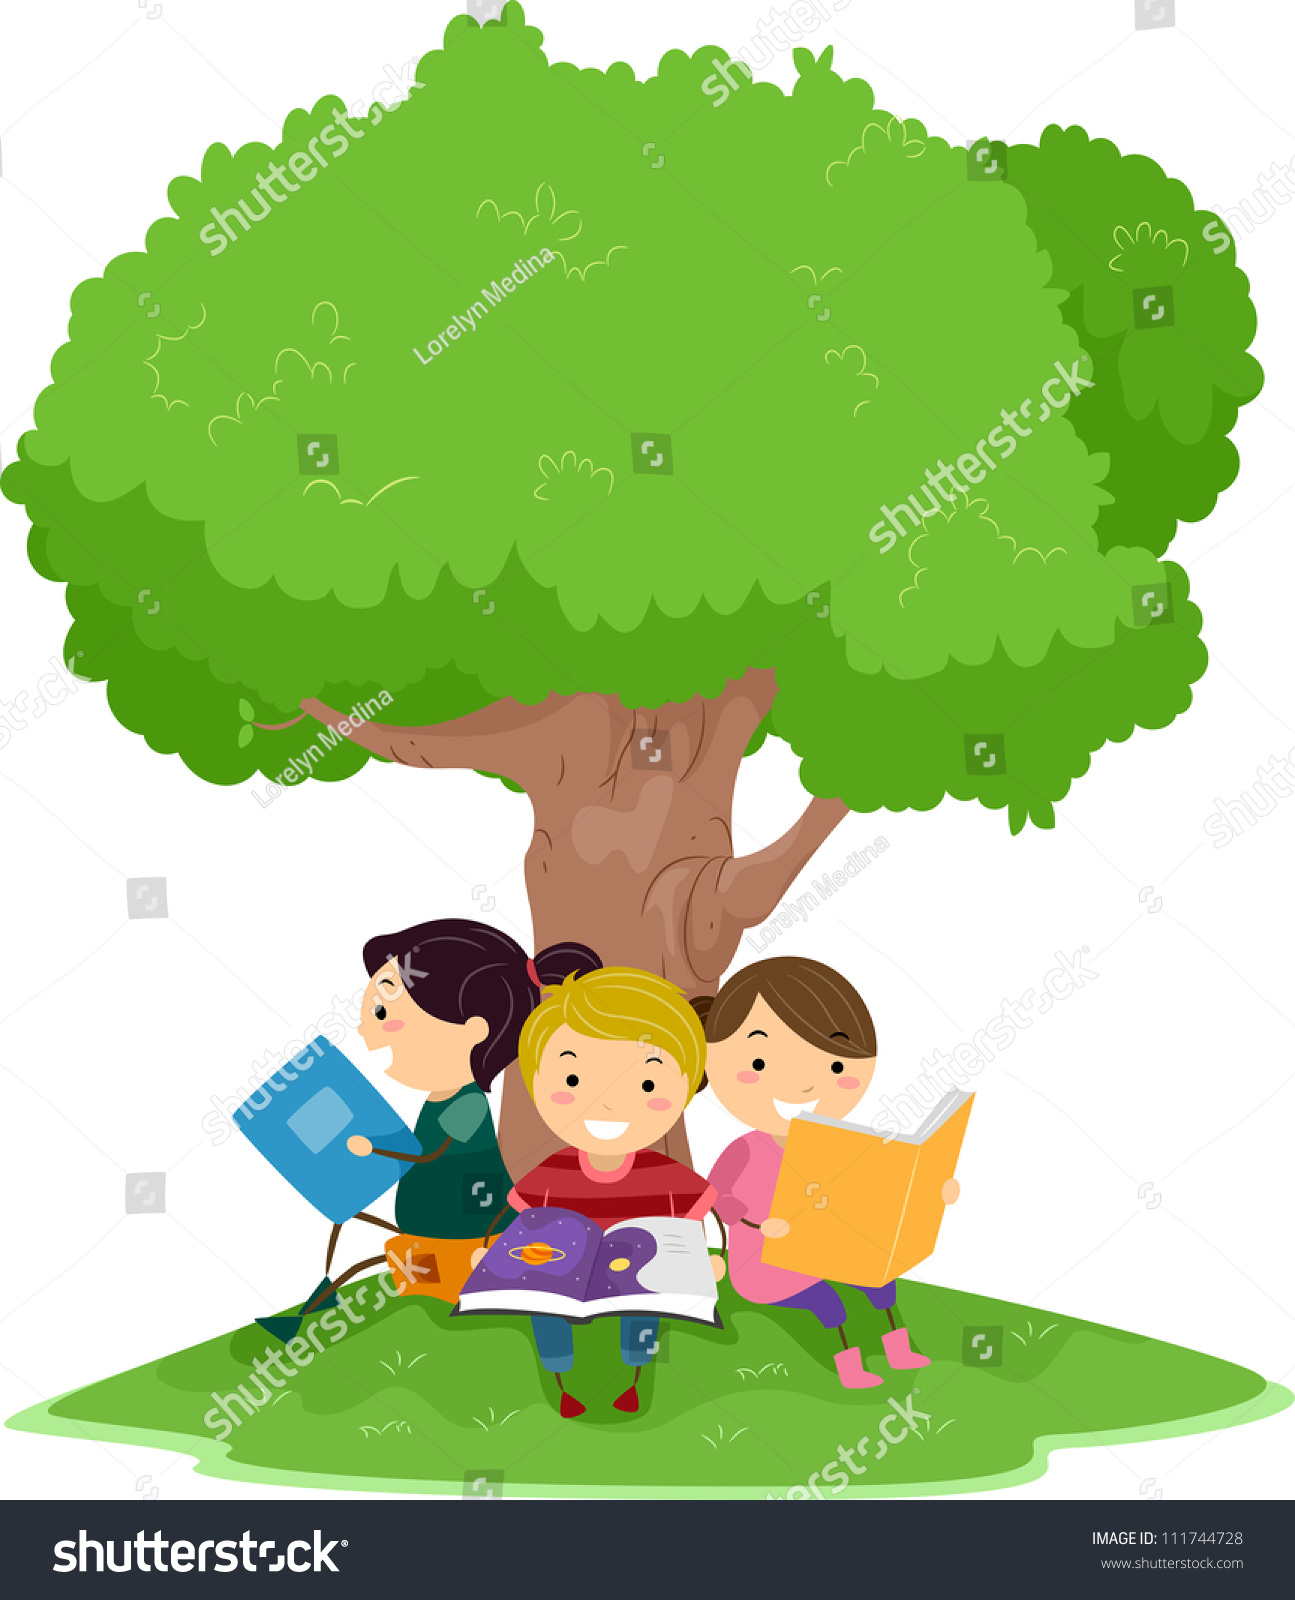 oxford reading tree clip art download - photo #33